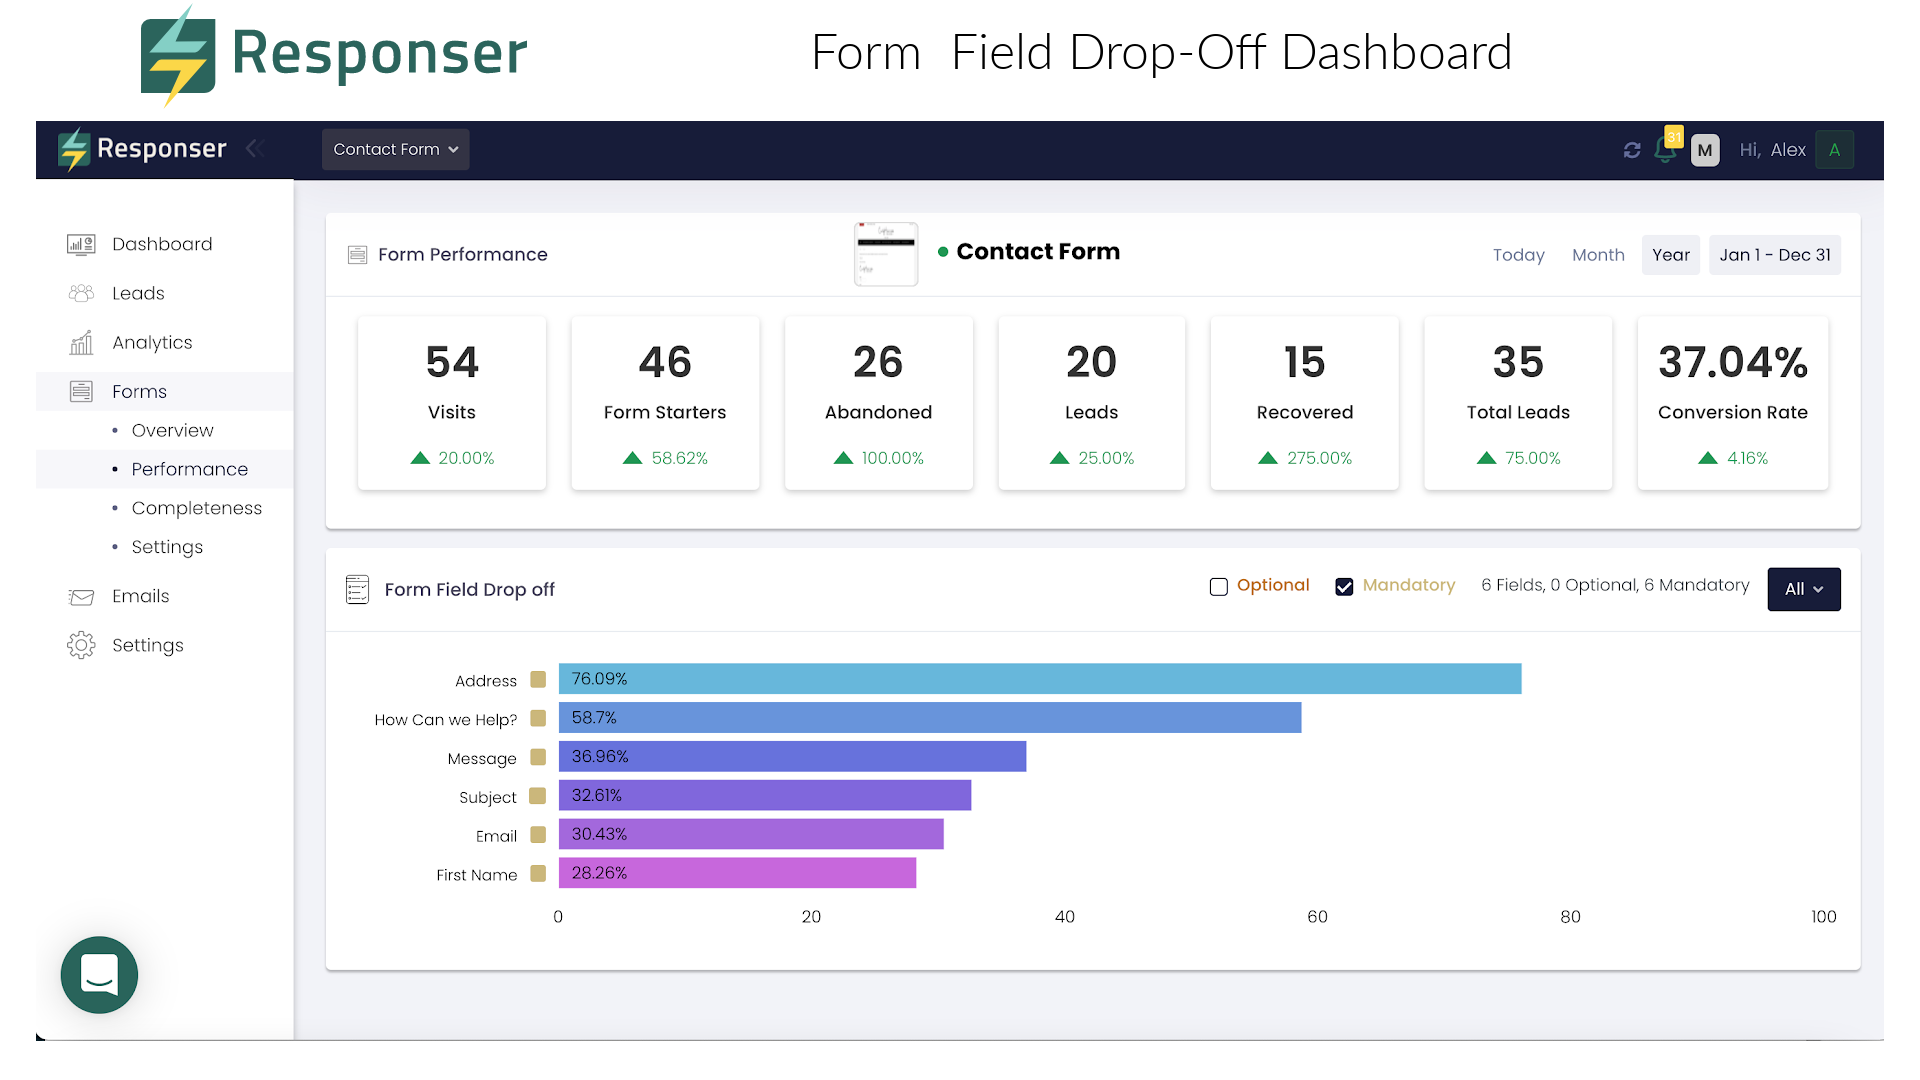 Form Field Drop-Off and Conversion Stats